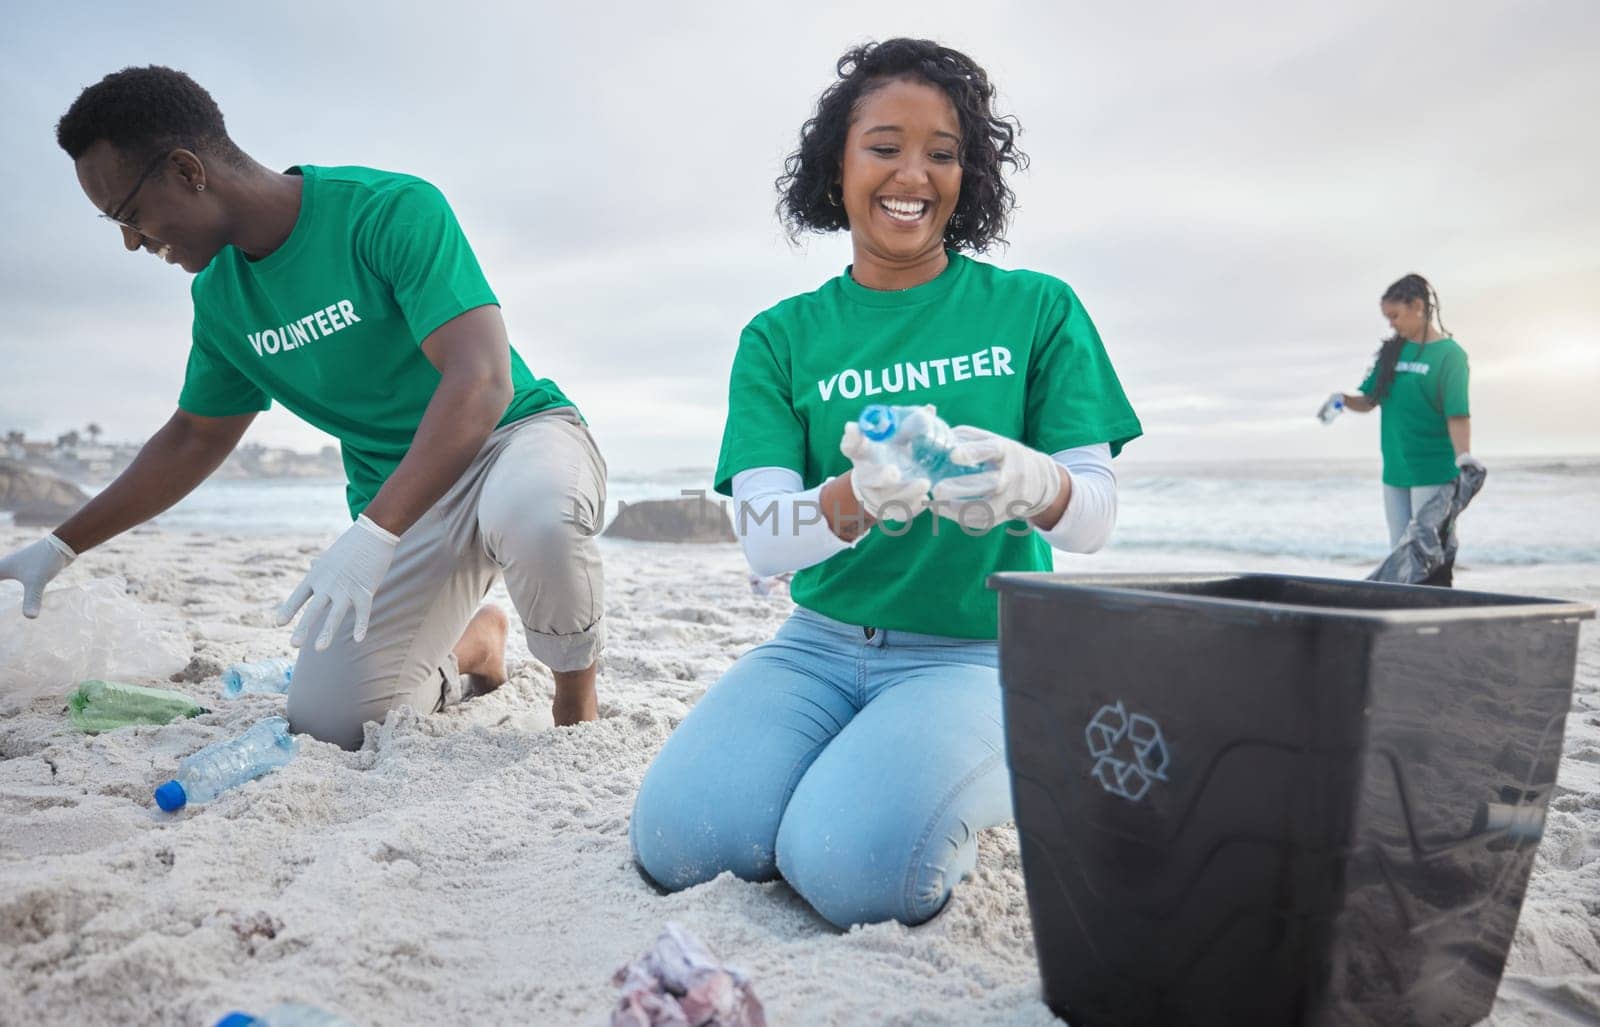 Volunteer group, beach clean and recycling plastic bottle for community service, pollution and earth day. Black woman and man ngo team cleaning sand for climate change, nature and helping environment.